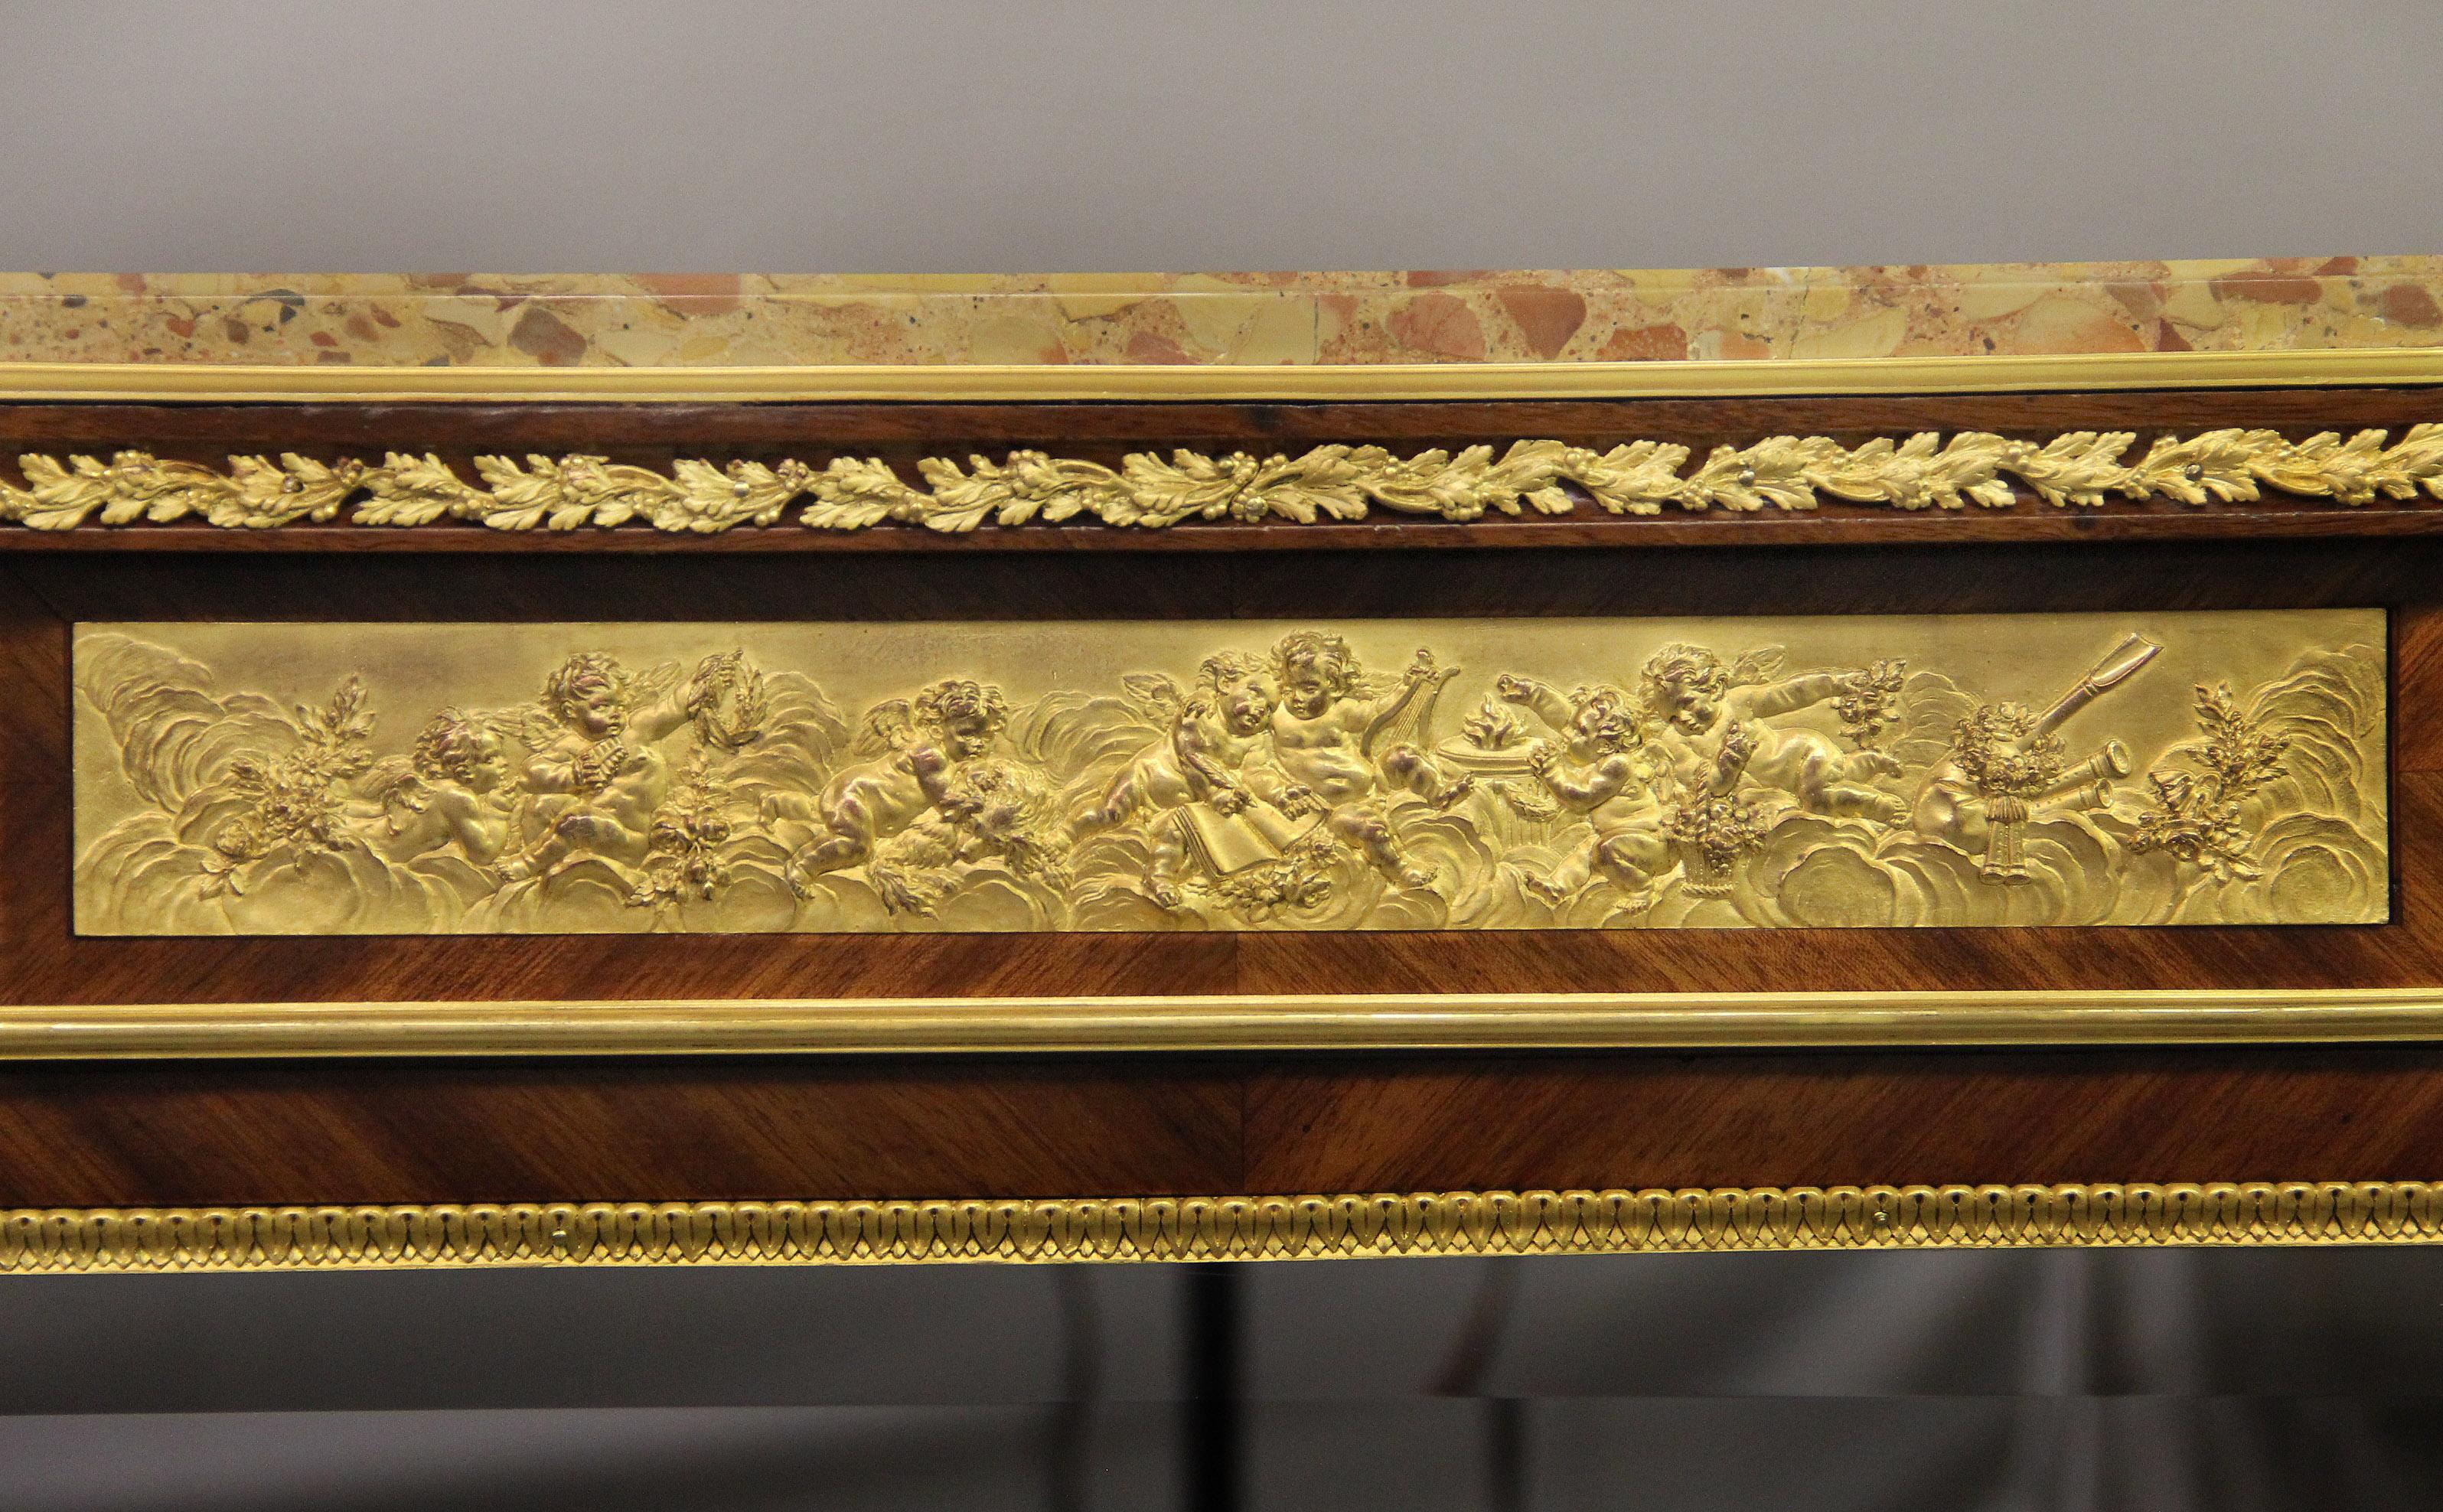 A beautiful late 19th century Louis XV style gilt bronze mounted Vernis Martin Vitrine by François Linke

François Linke – Index no. 75

The brèche d' alep marble top above scrolling foliage centered by an ormolu frieze of frolicking putti, the